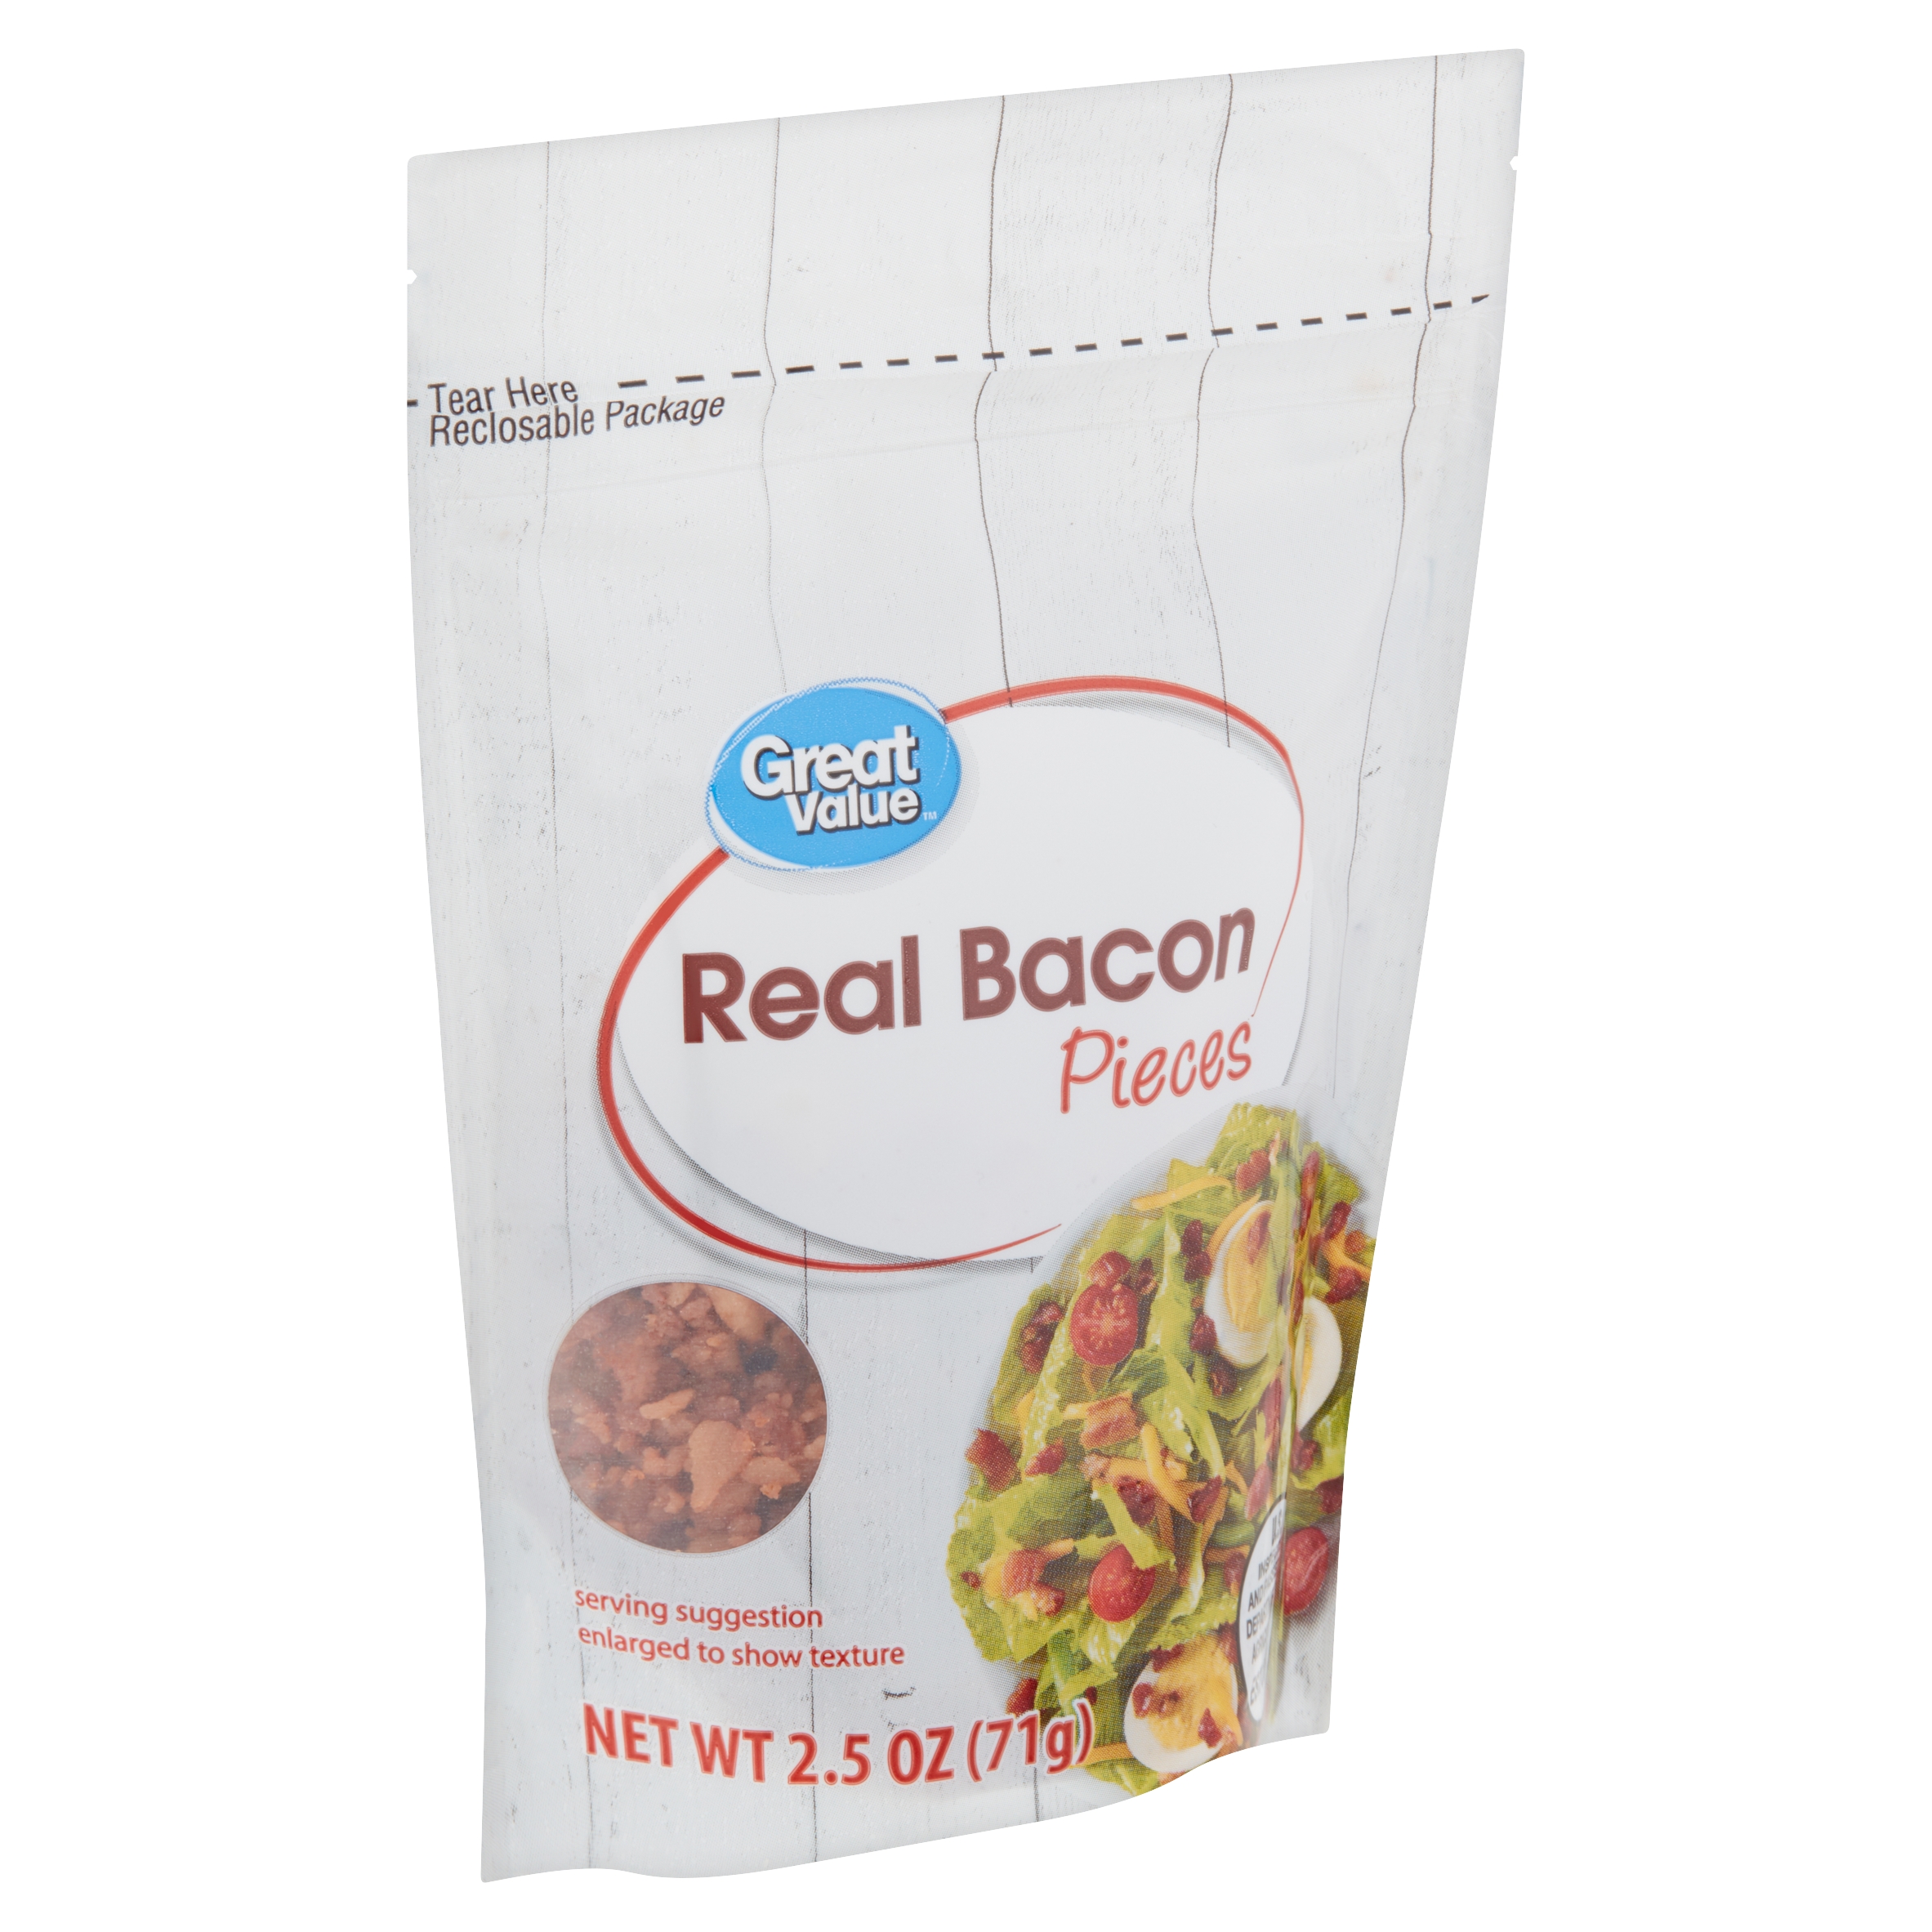 Great Value Real Bacon Pieces, 2.5 Oz Image